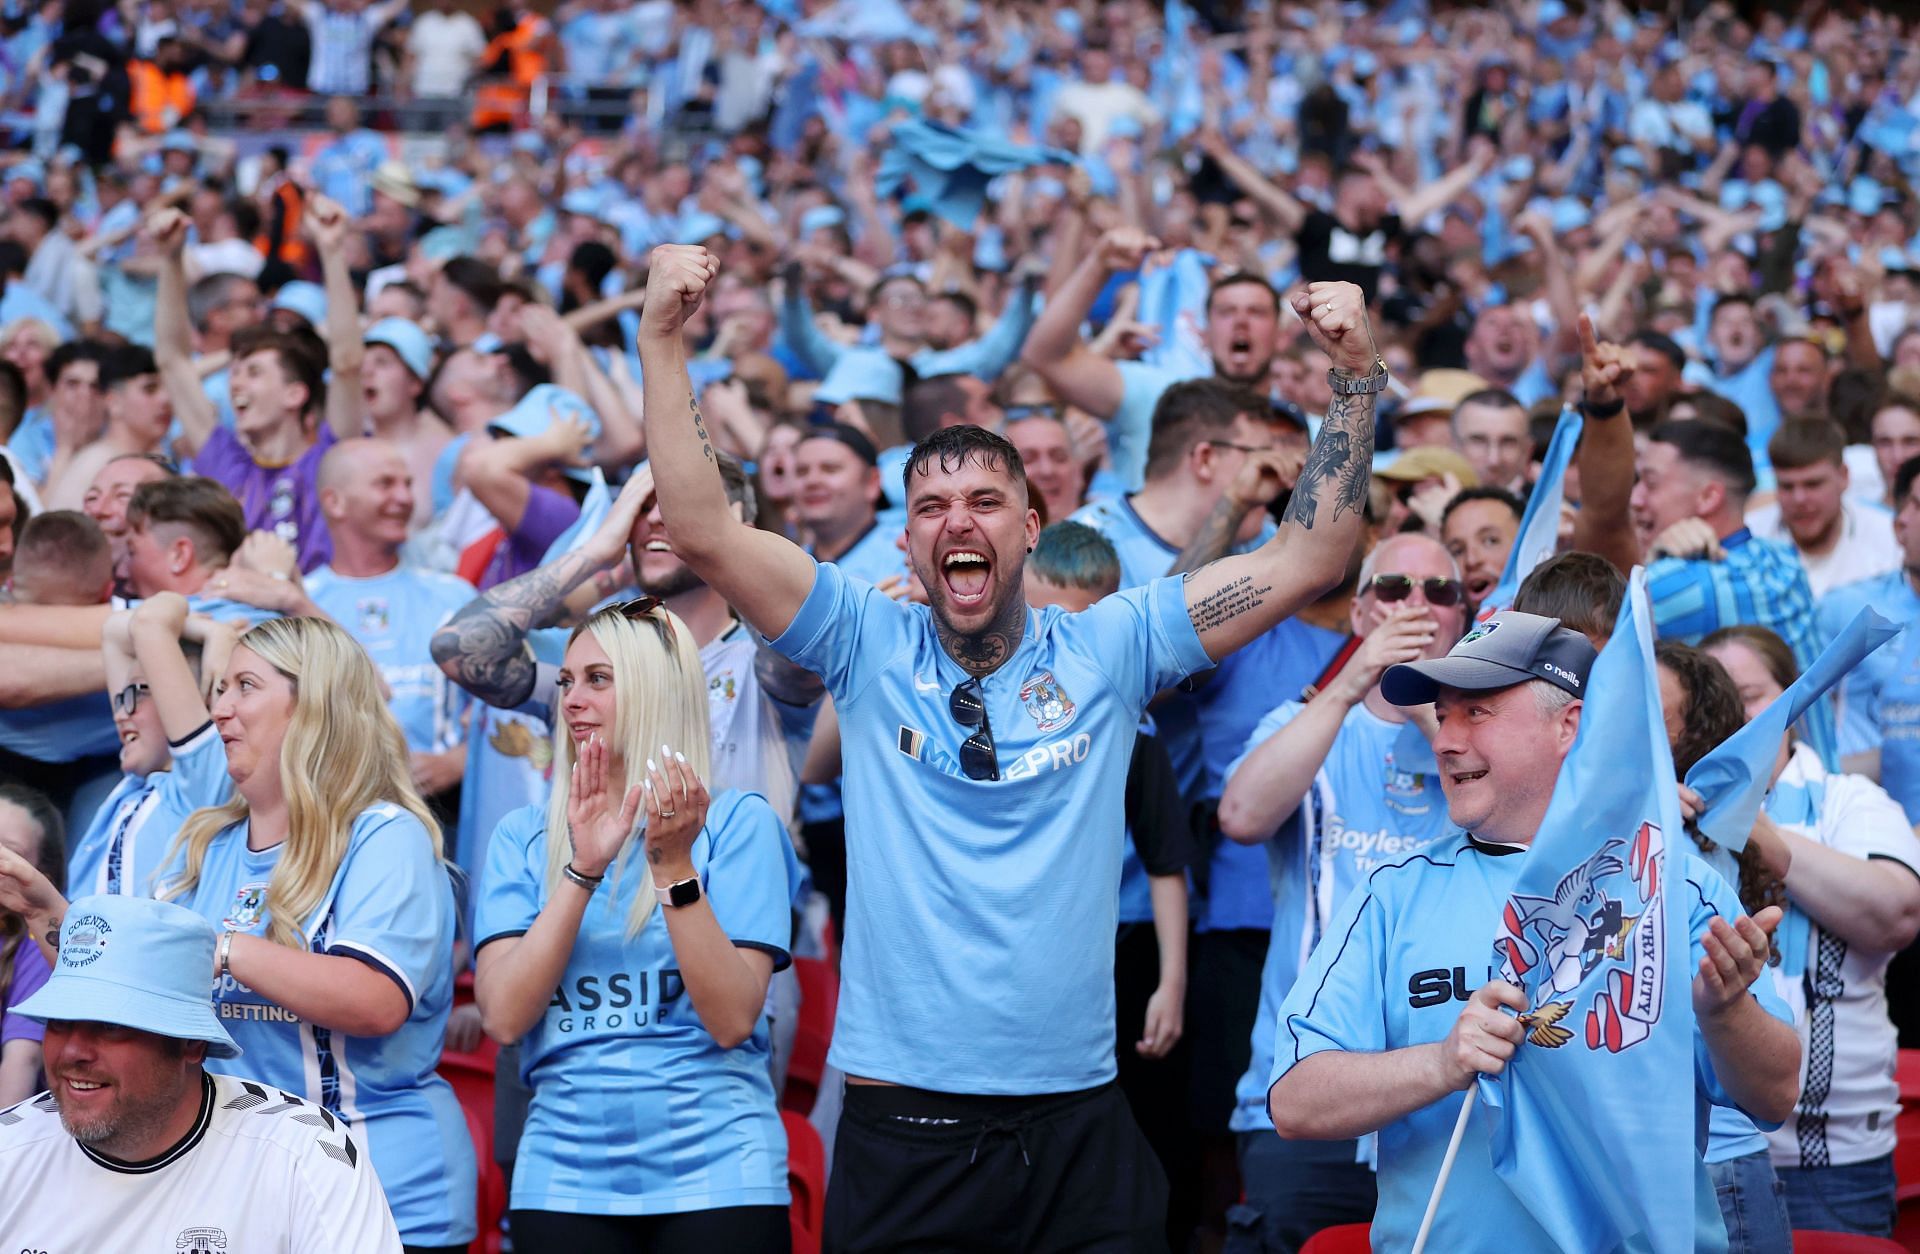 Coventry City v Luton Town: Sky Bet Championship Play-Off Final